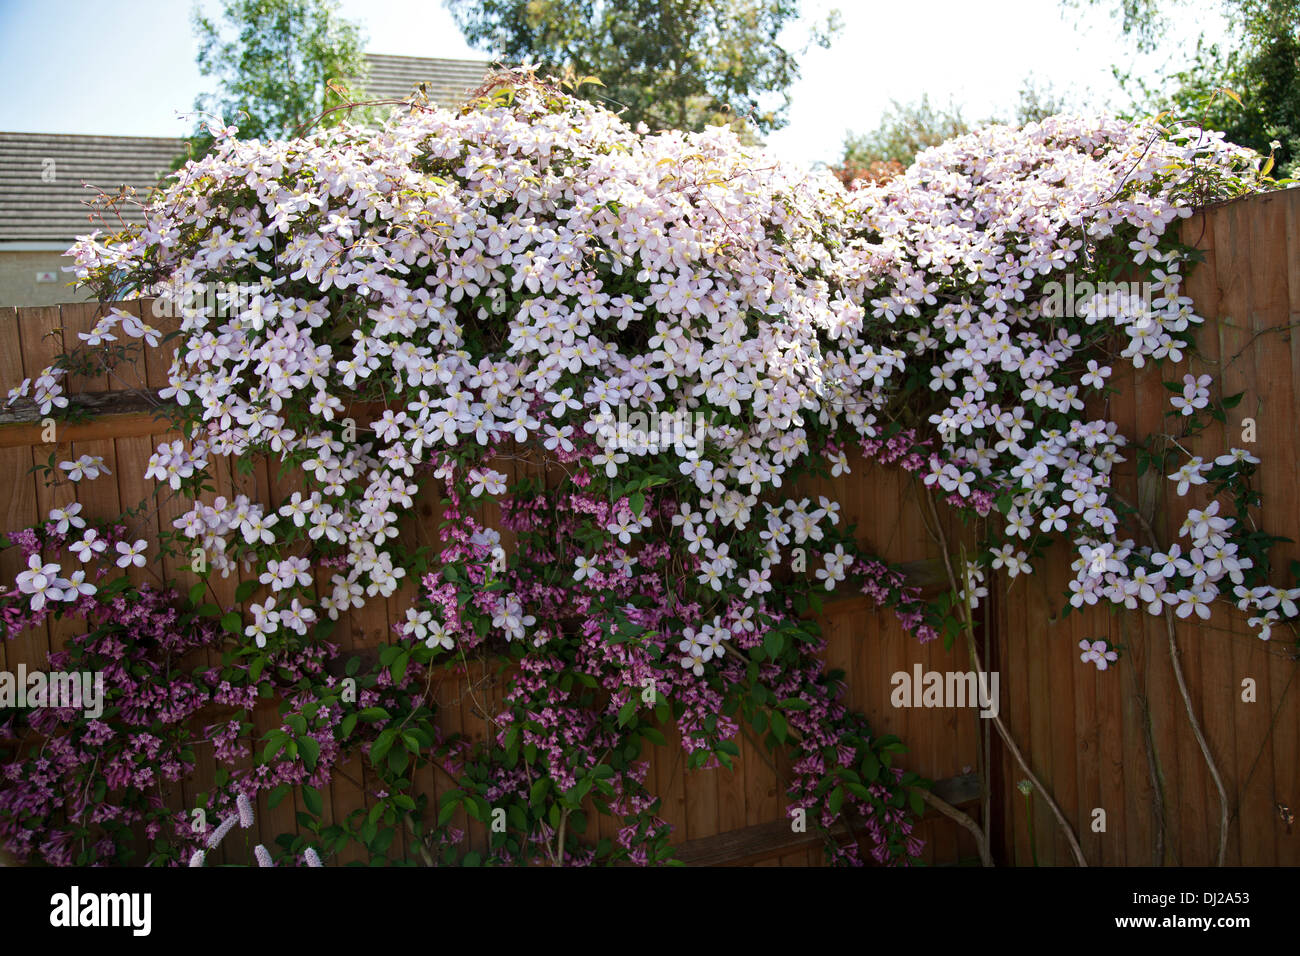 Clematis Montana growing over a fence in an English garden Stock Photo